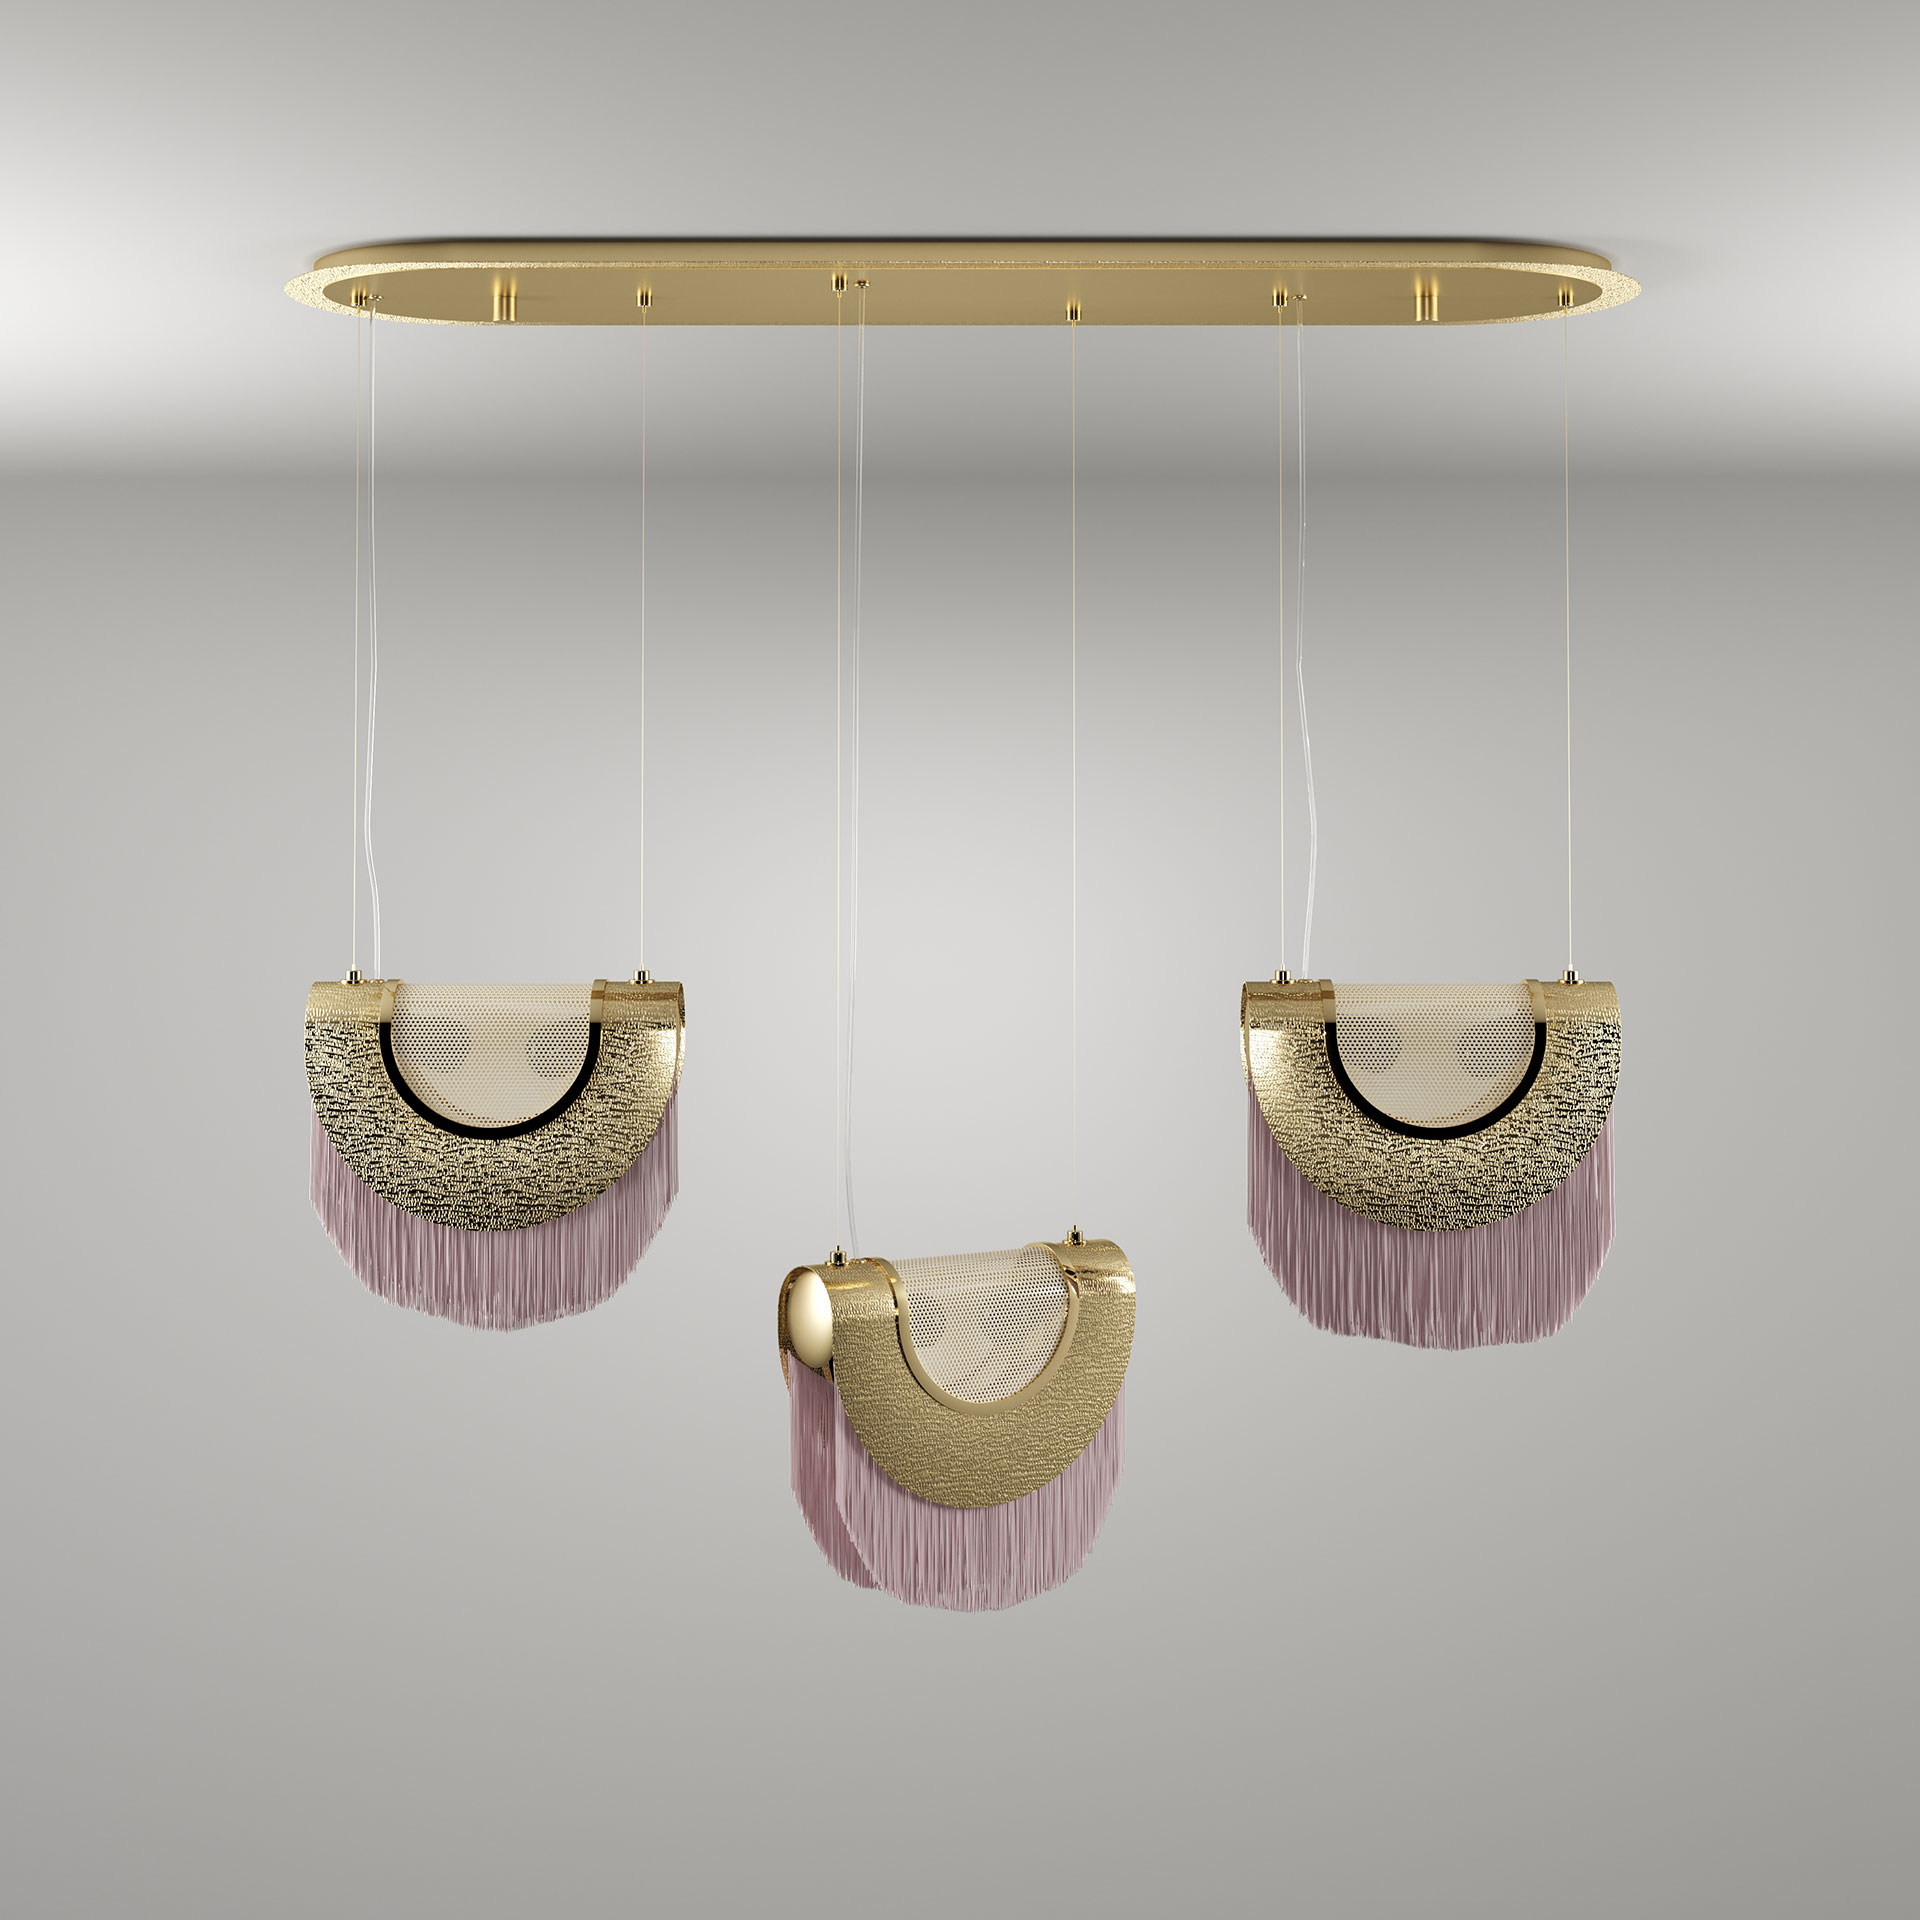 Seoul suspension lamp by creativemary | luxury lighting